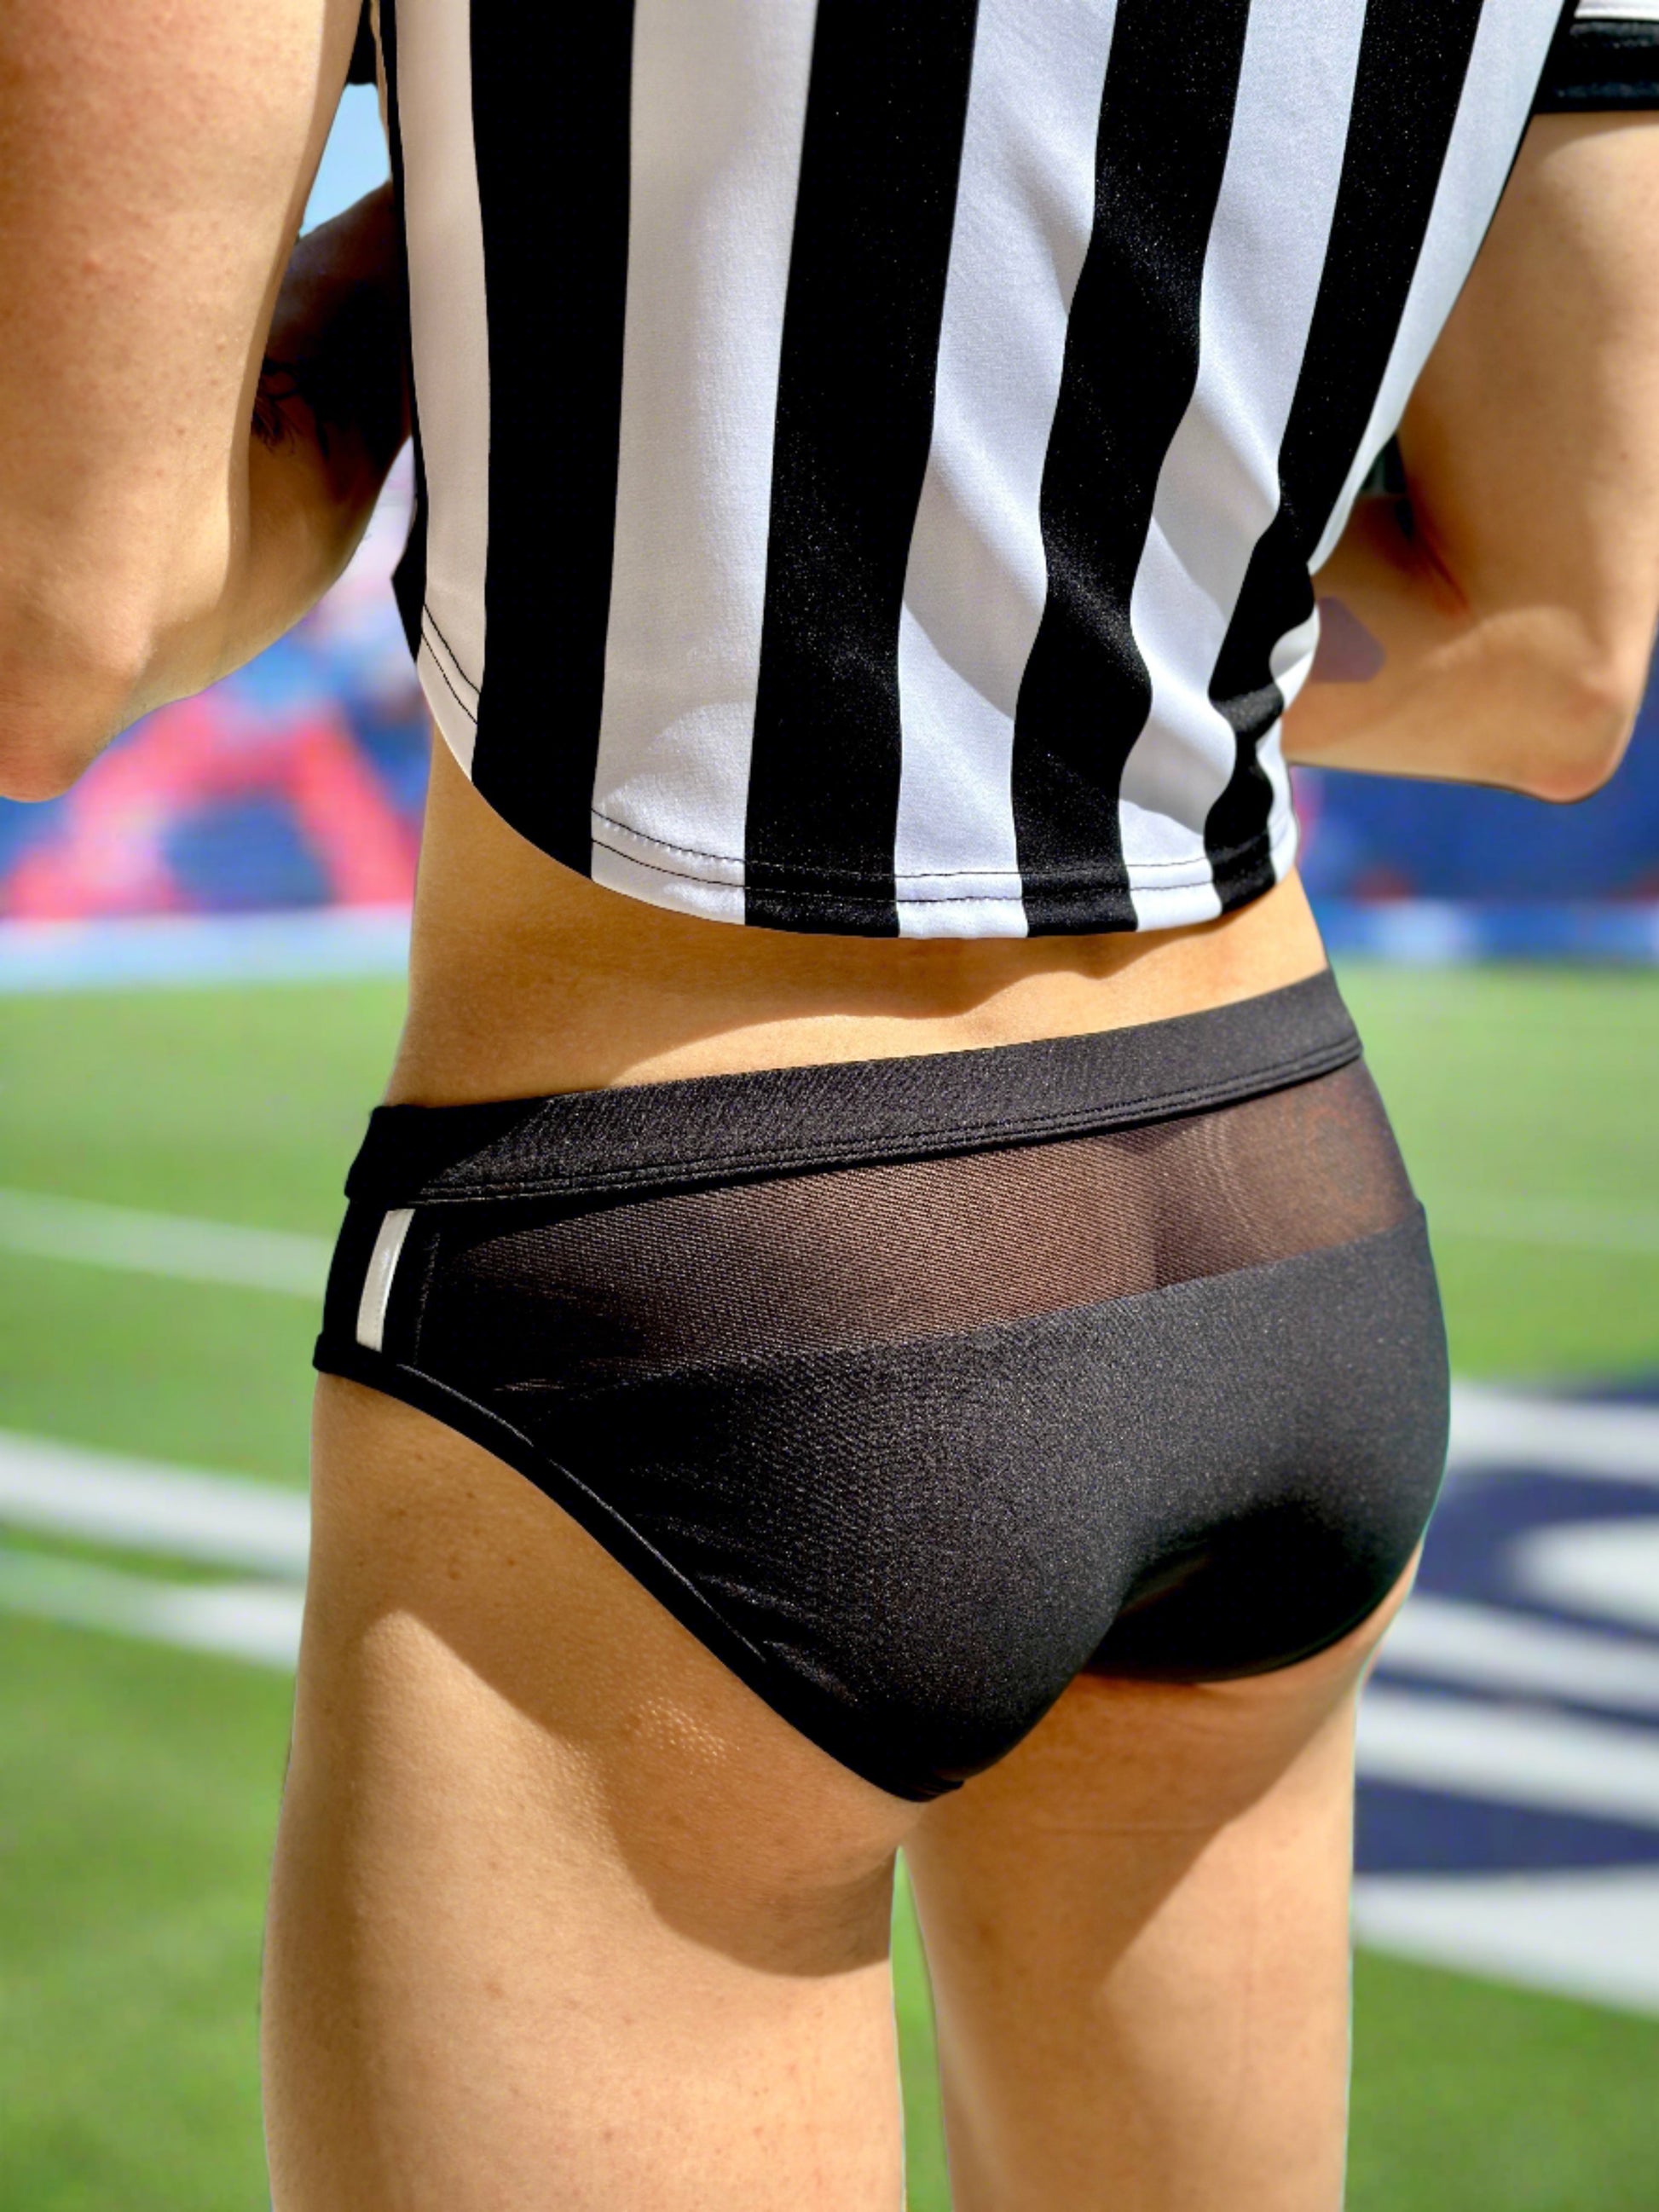 Our Sexy and Daring Referee Swim Brief for Men. Speedo style cut